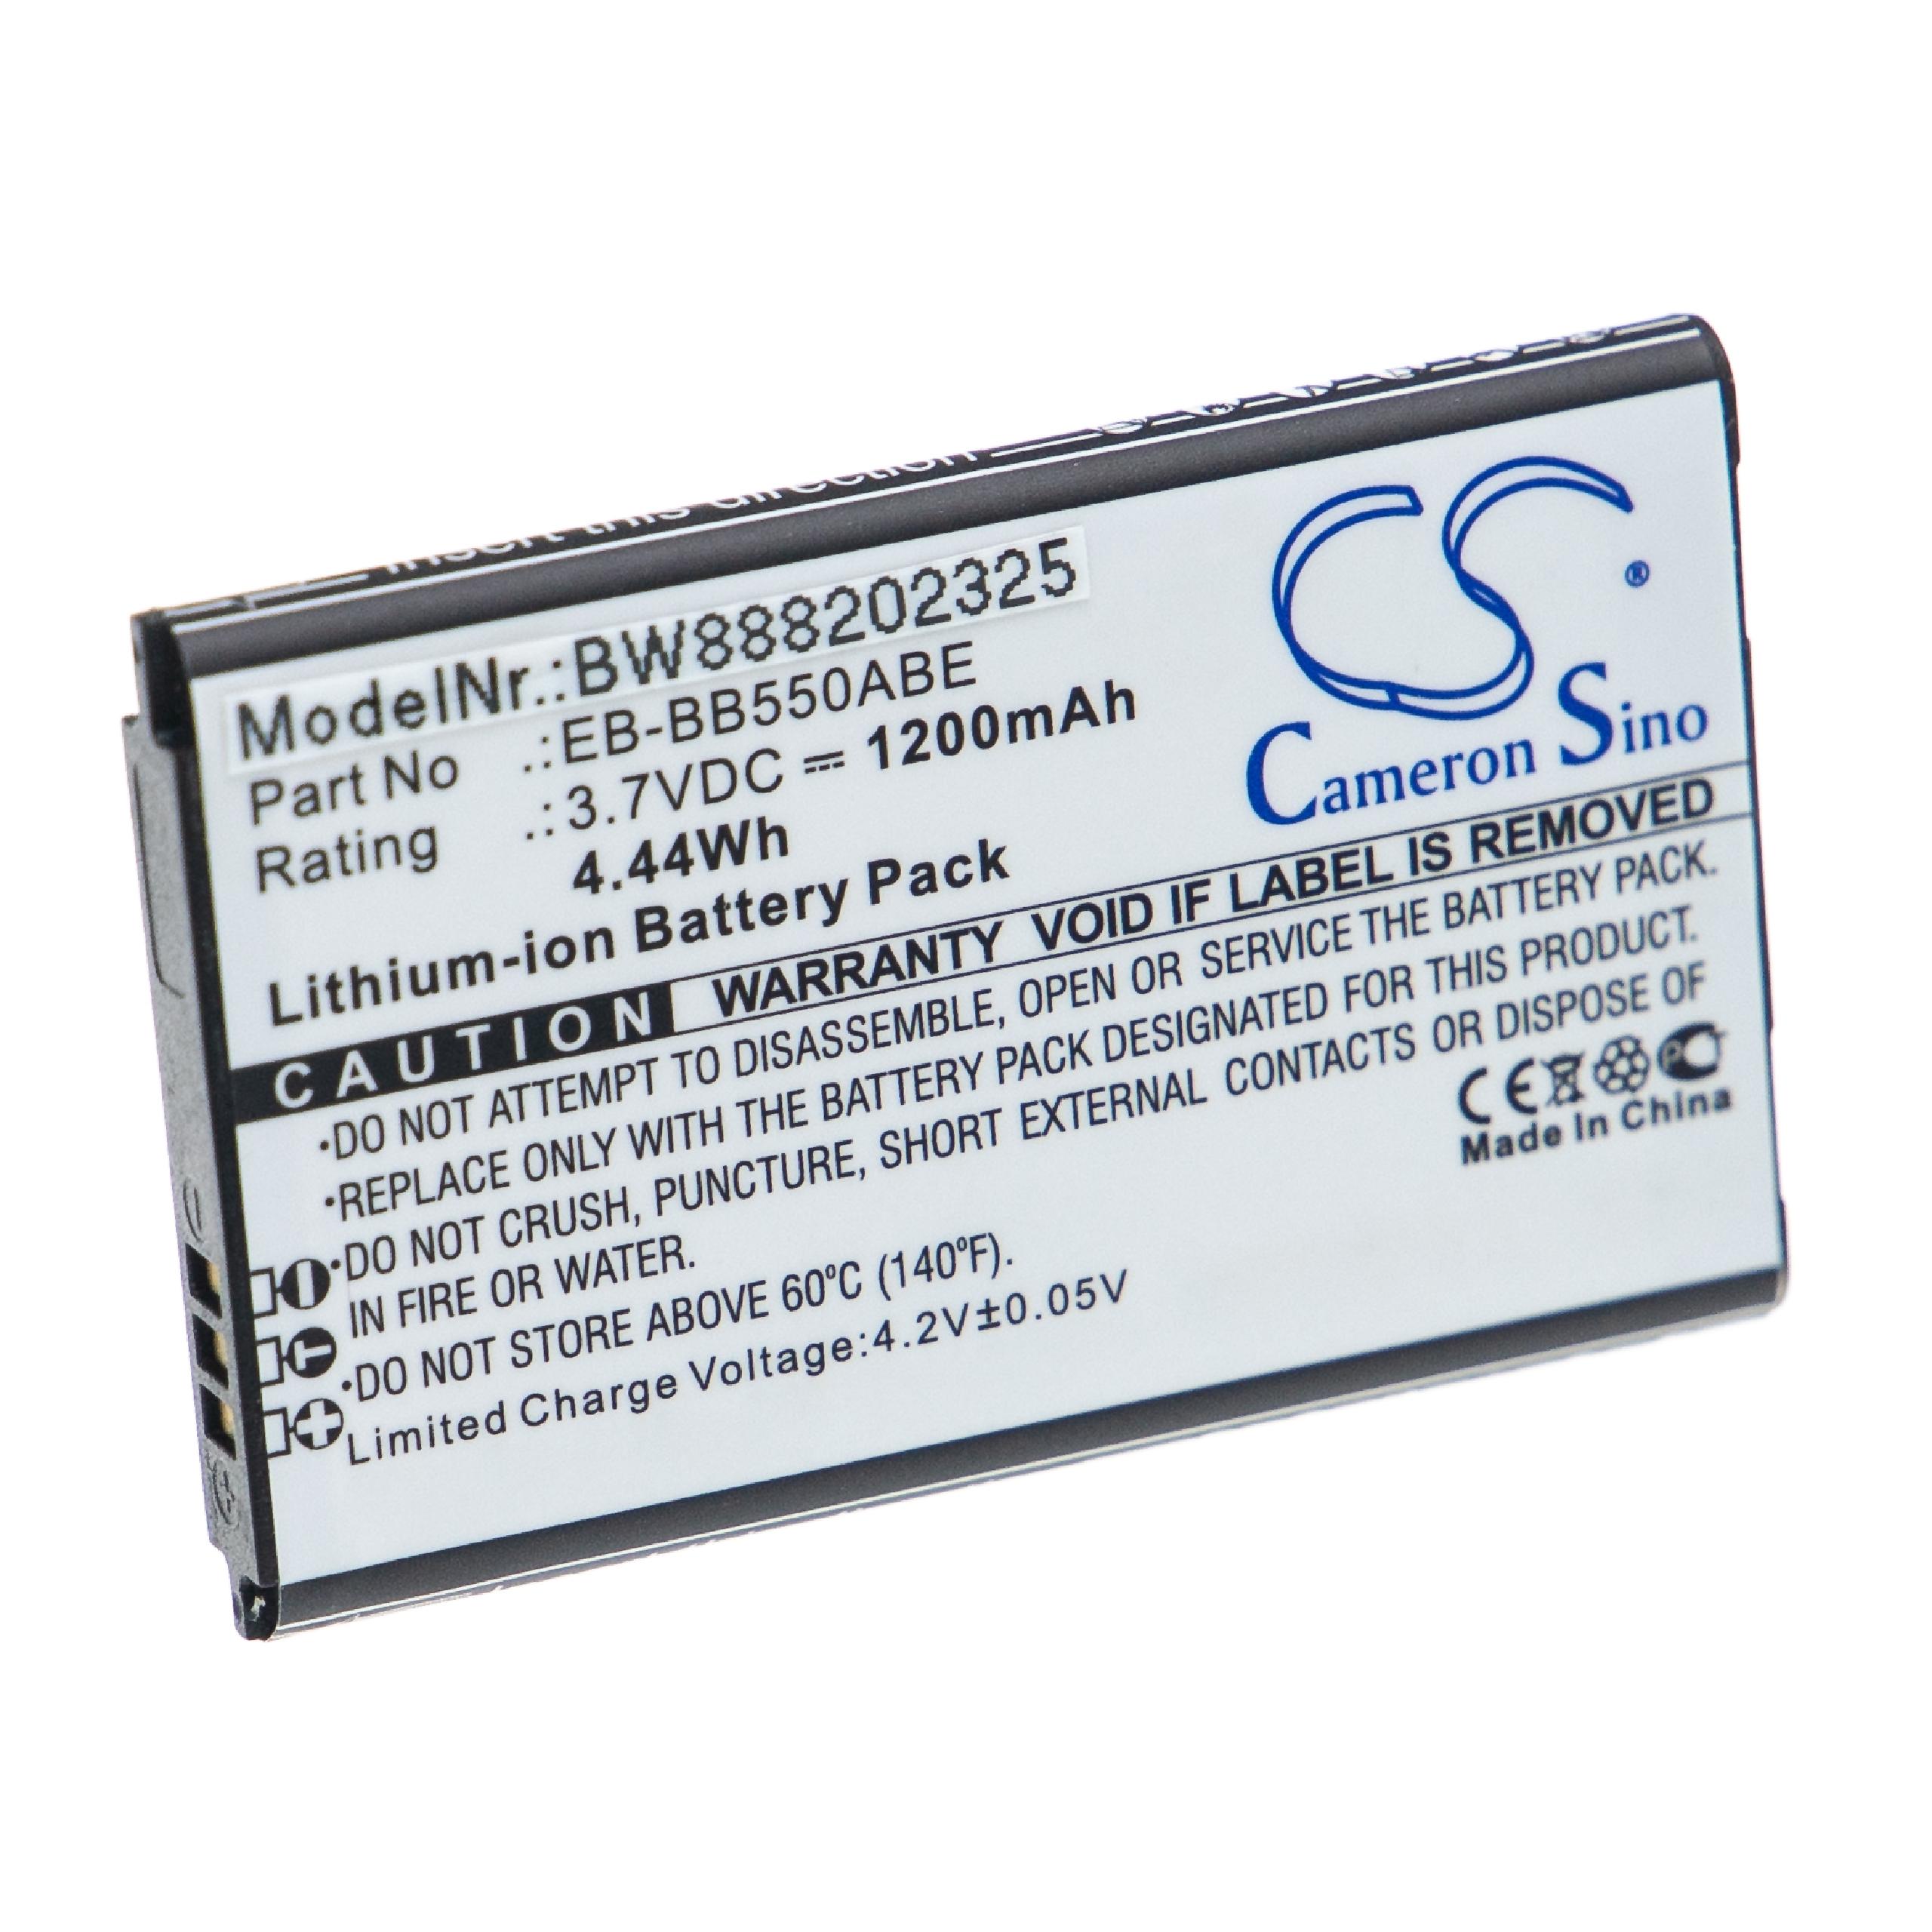 Mobile Phone Battery Replacement for Samsung EB-BB550ABE - 1200mAh 3.7V Li-Ion